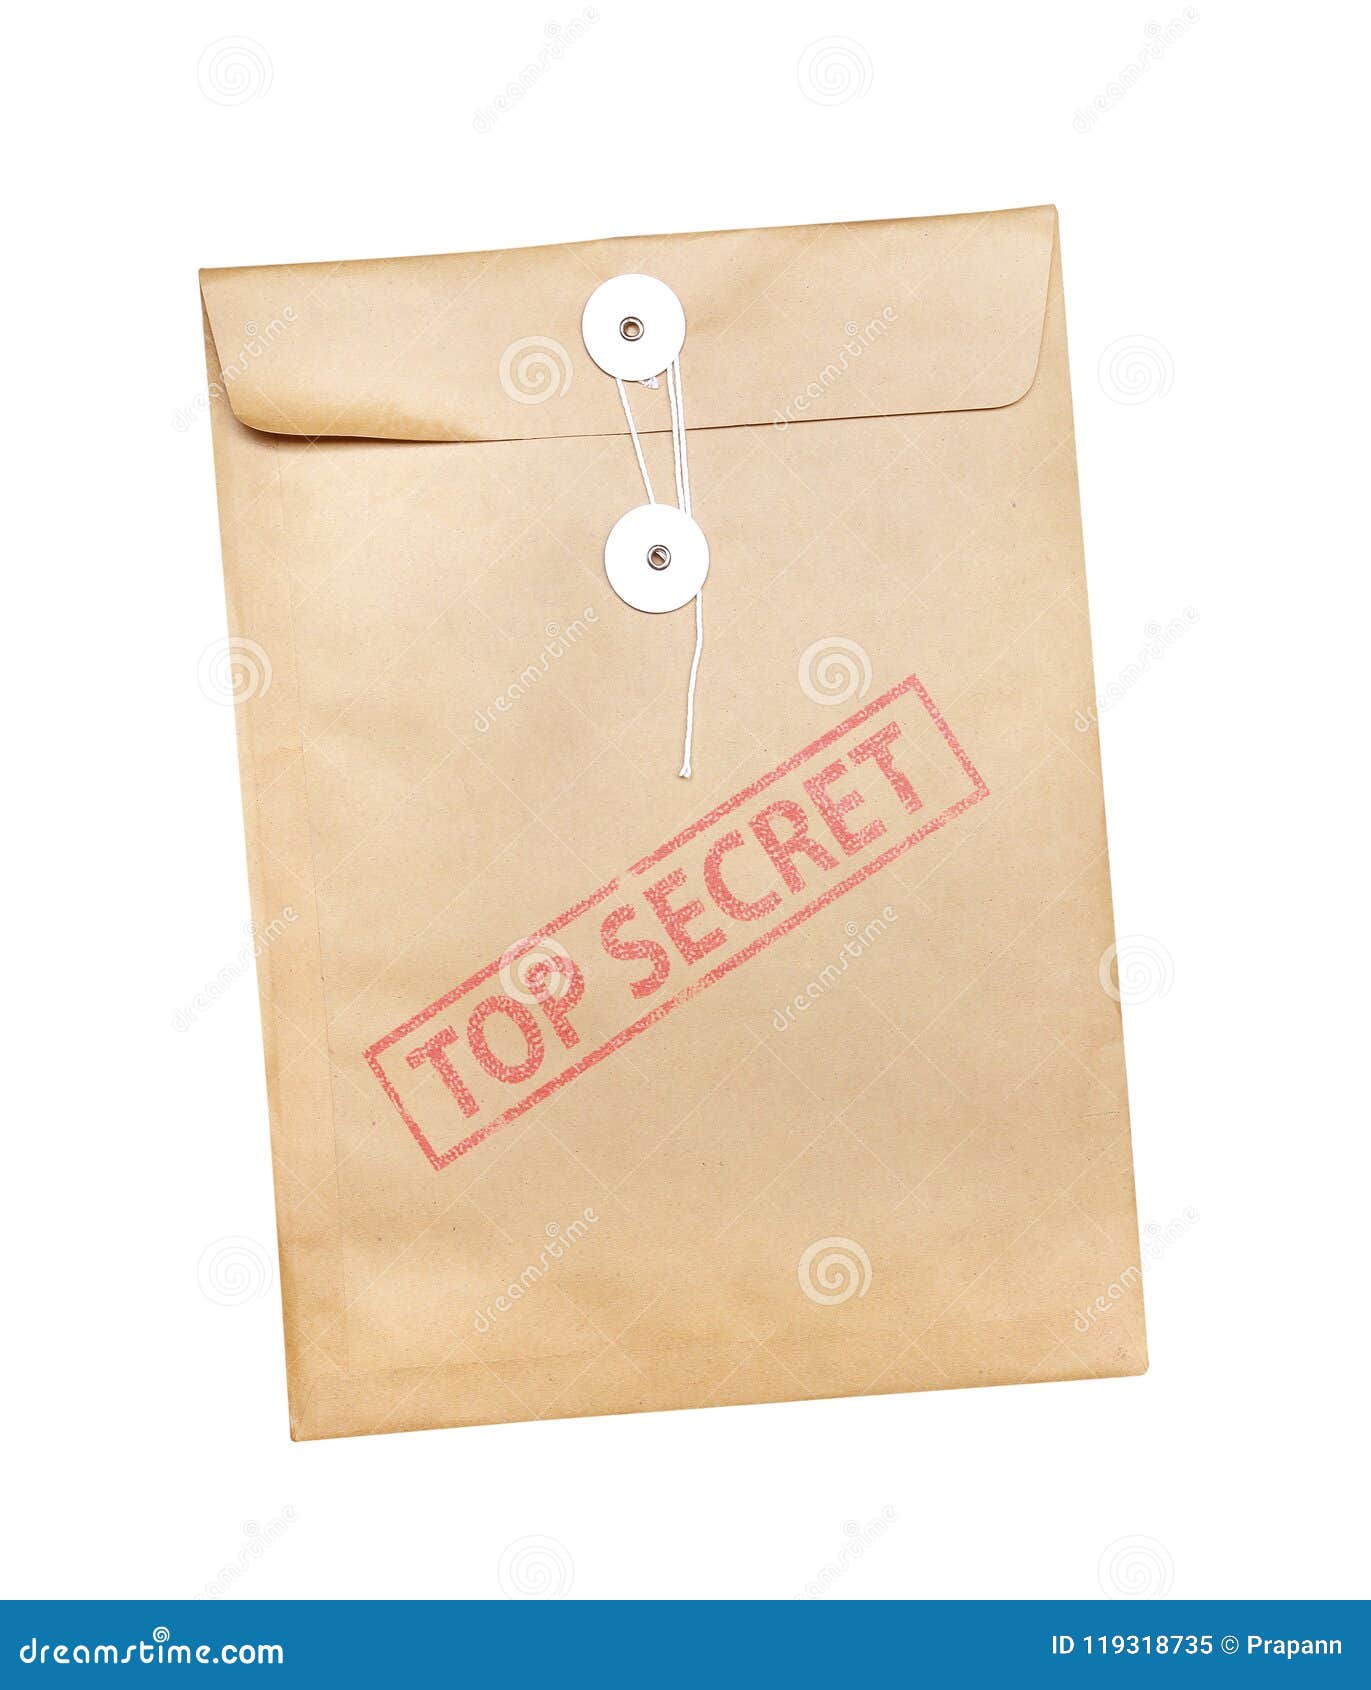 top secret package  over a white background.